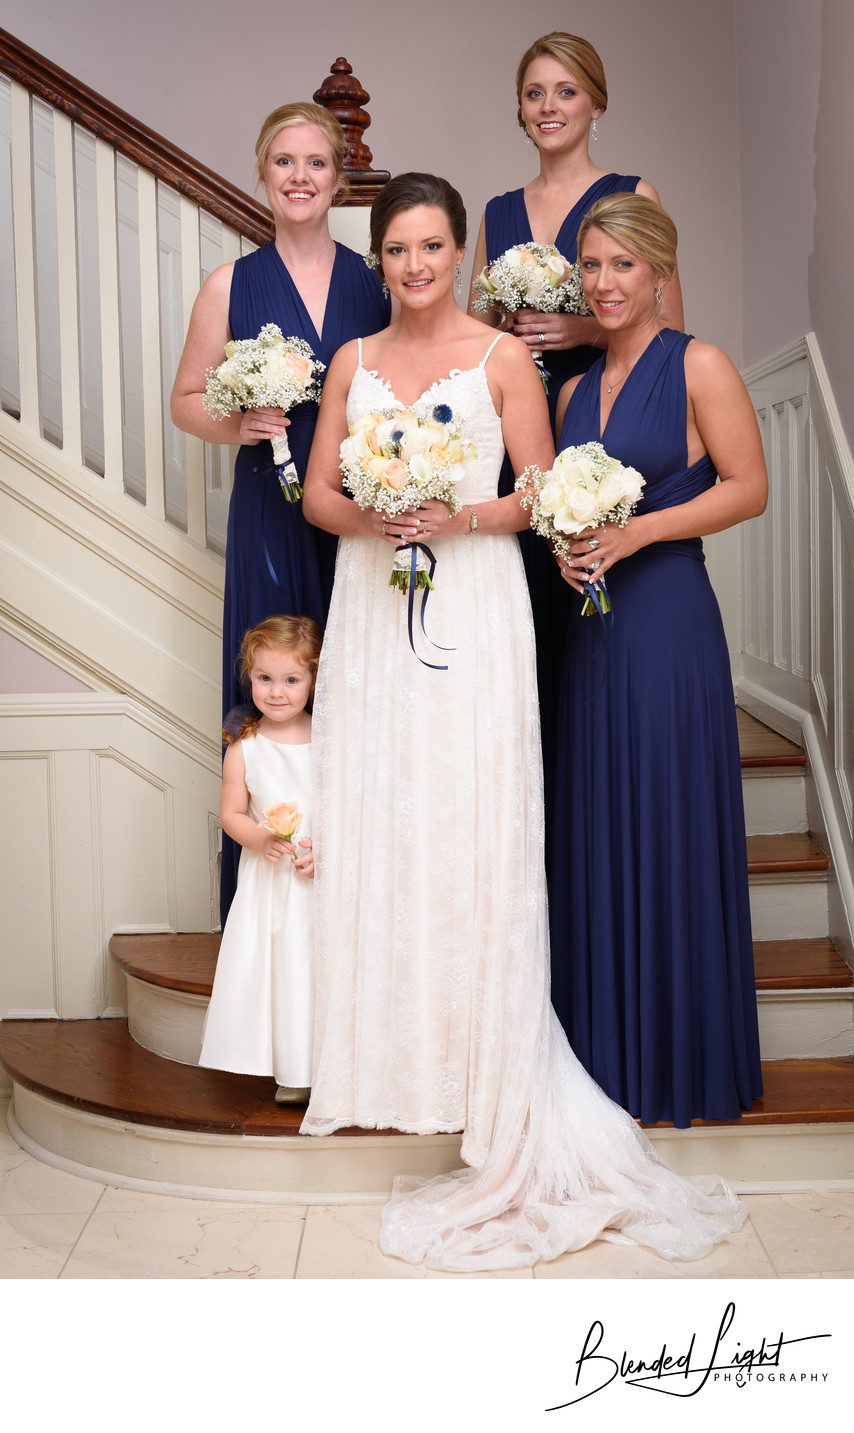 Wake Forest Bridal Party Image